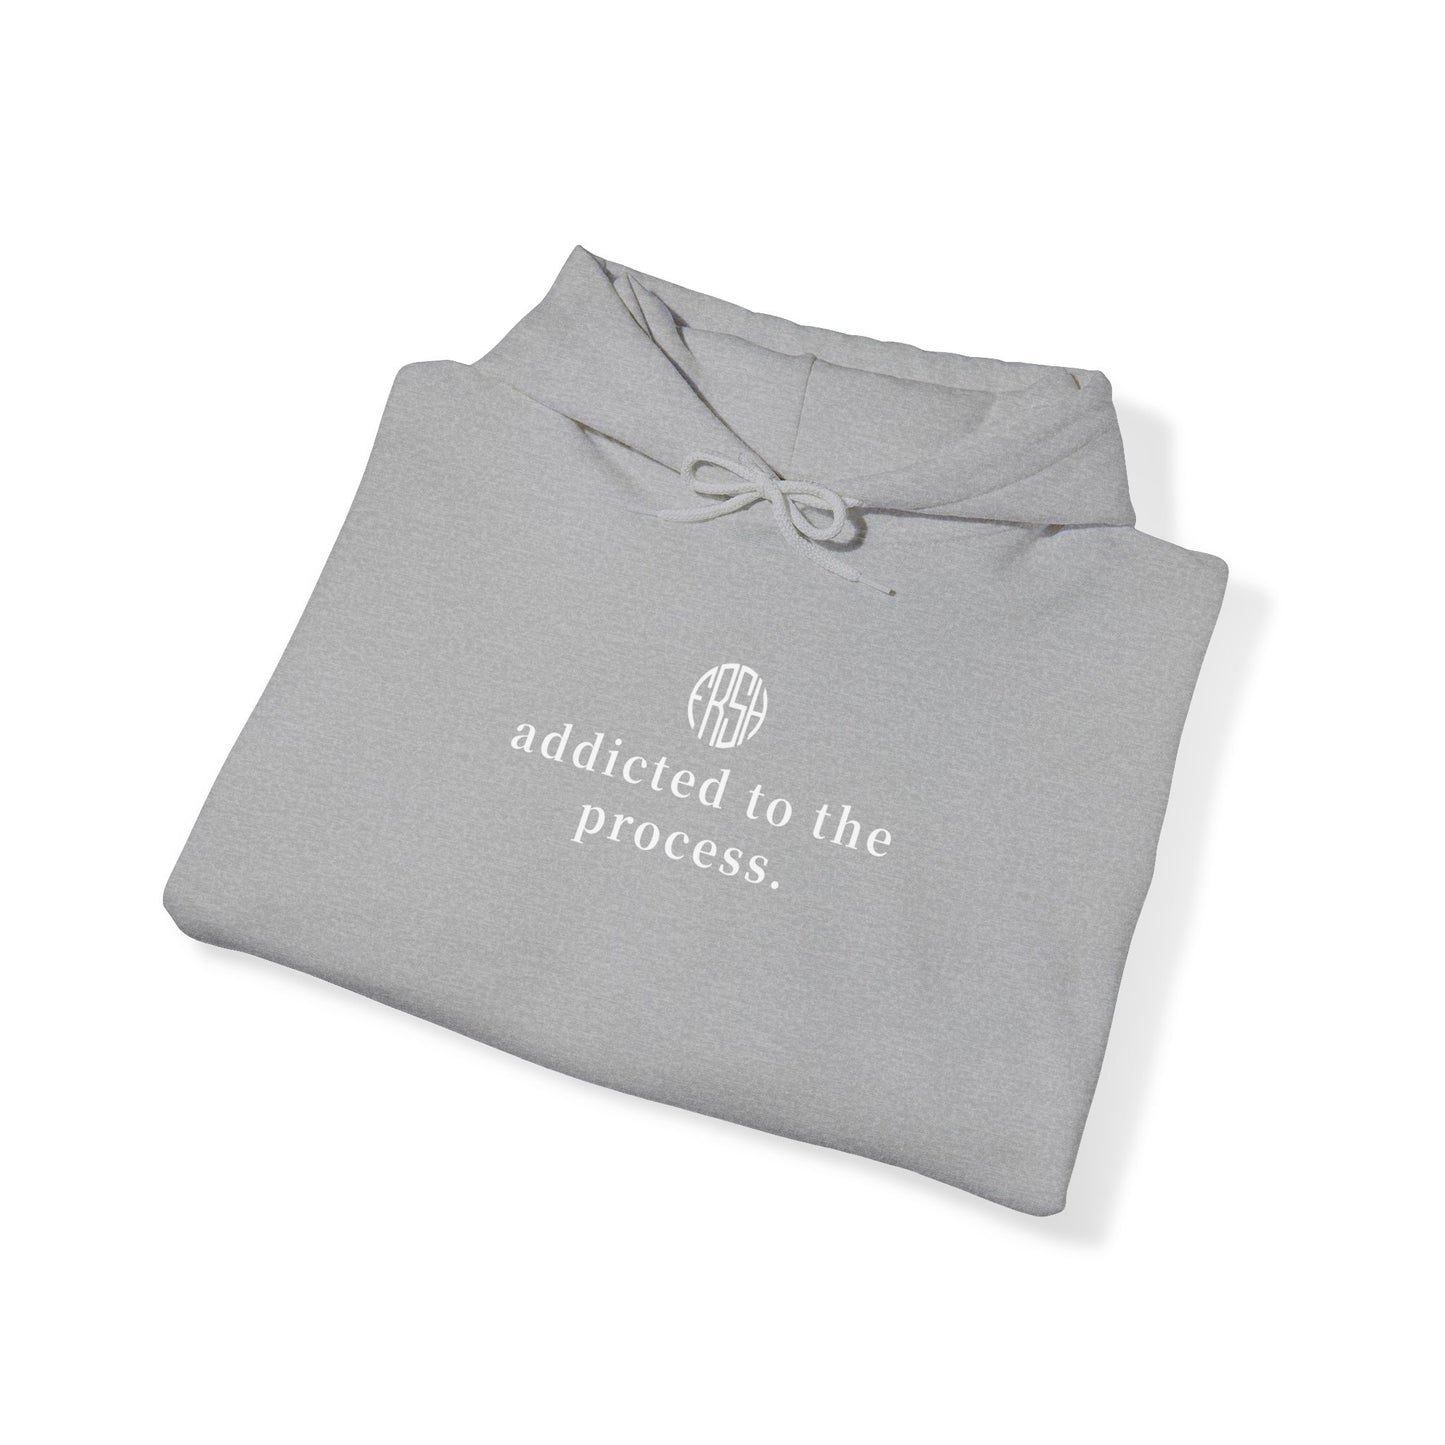 addicted to the process. Hoodie | FRSH Collection